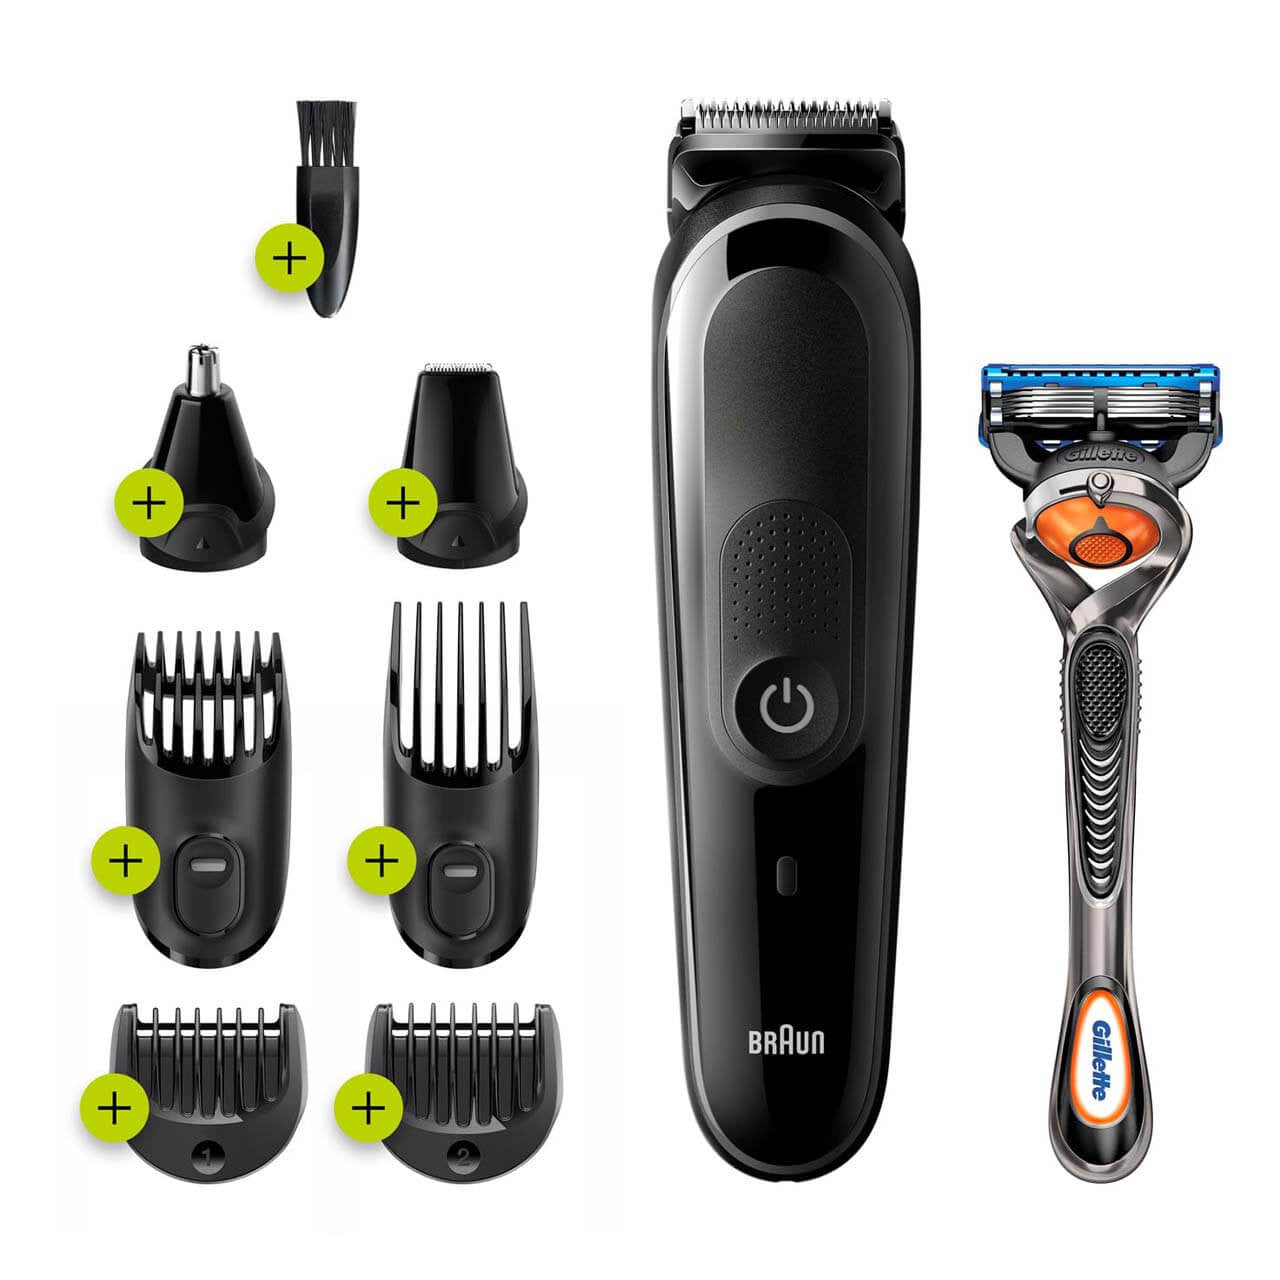 Braun All-in-One trimmer 5 for Face, Hair, and Body, 8-in-1 styling kit